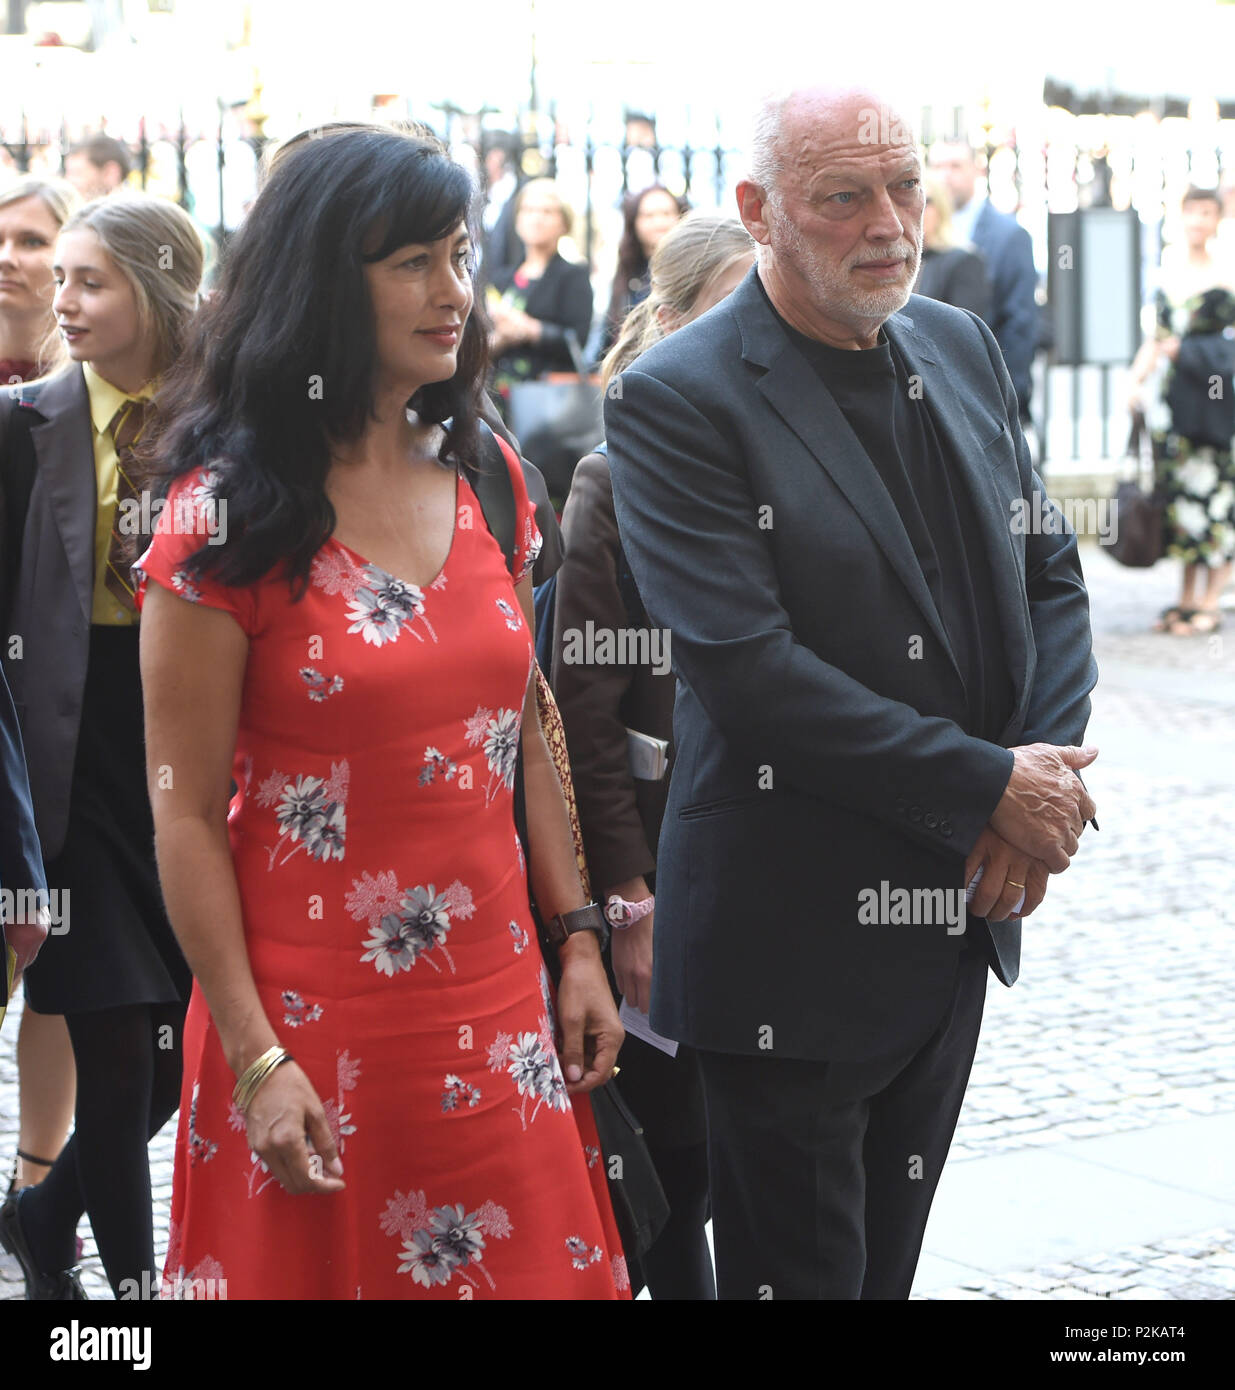 Photo Must Be Credited ©Alpha Press 079965 15/06/2018 Dave Gilmour with his wife Polly Samson  Service of Thanksgiving for Professor Stephen Hawking At Westminster Abbey London Stock Photo